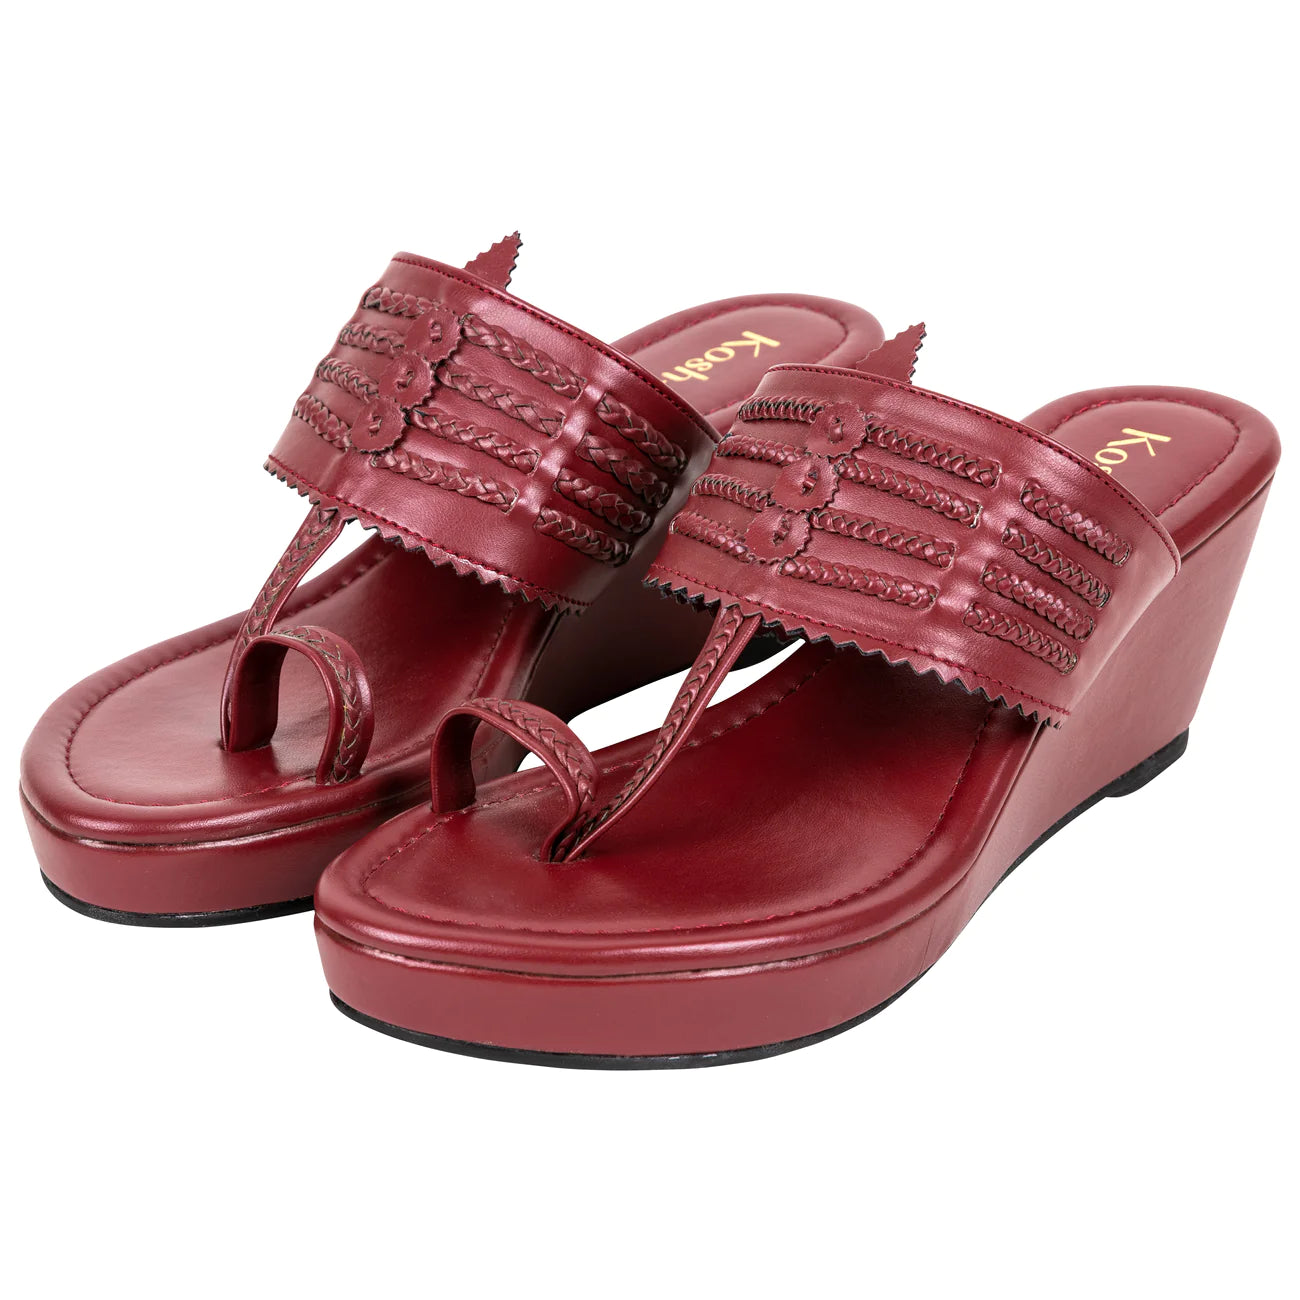 maroon wedge sandals for women in usa